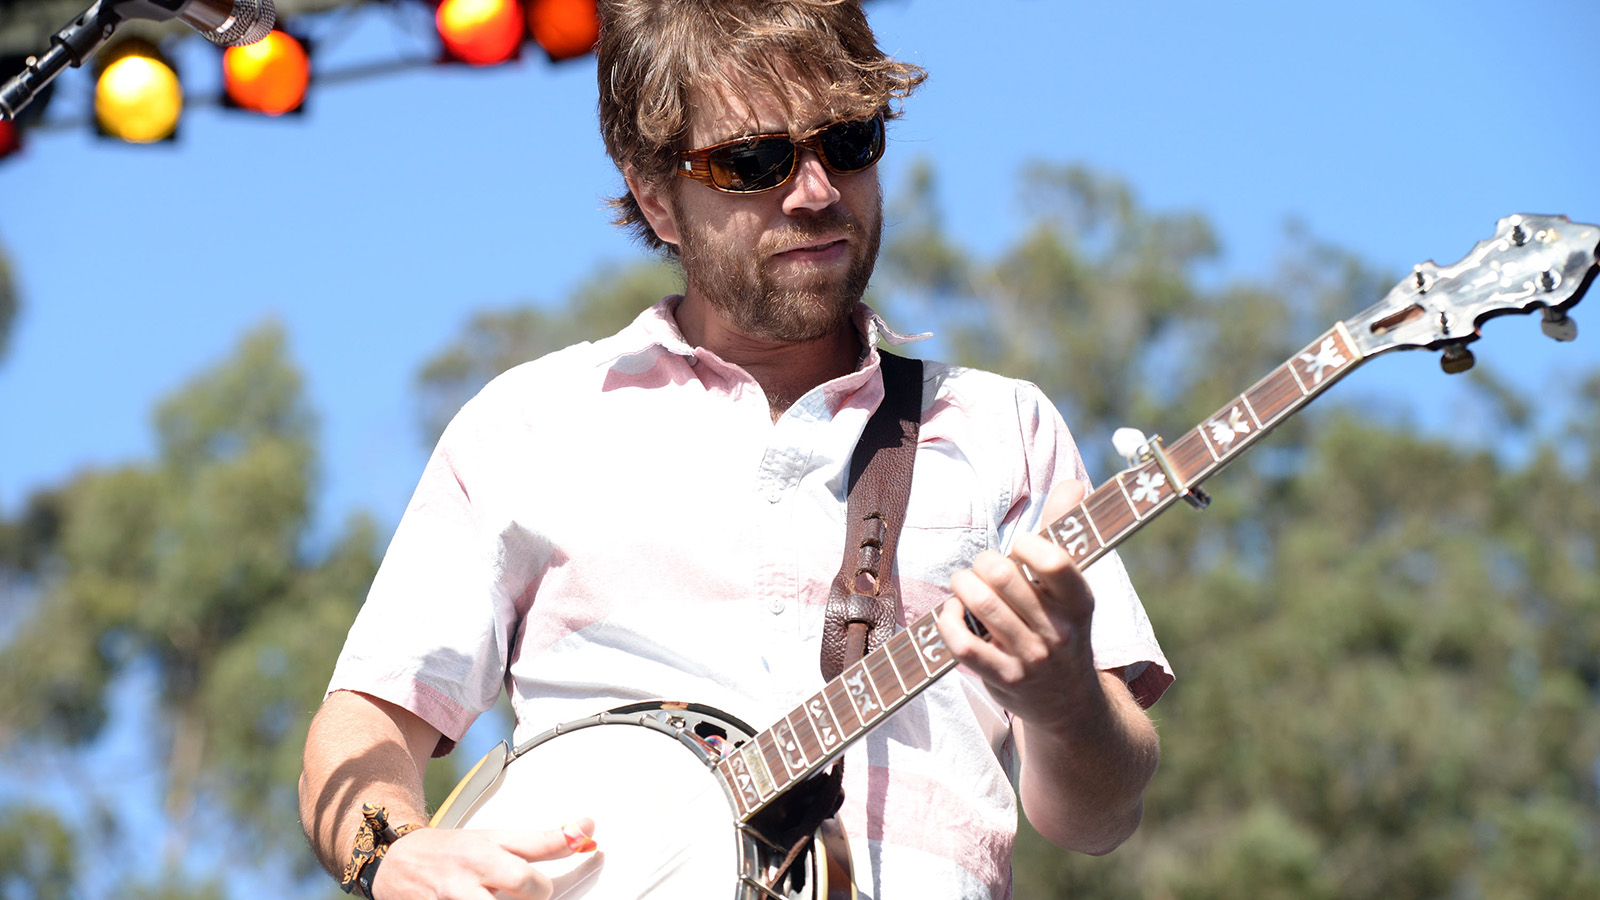 Banjo player Andy Thorn of Leftover Salmon performs onstage at Golden Gate Park on October 3, 2015 in San Francisco, California.